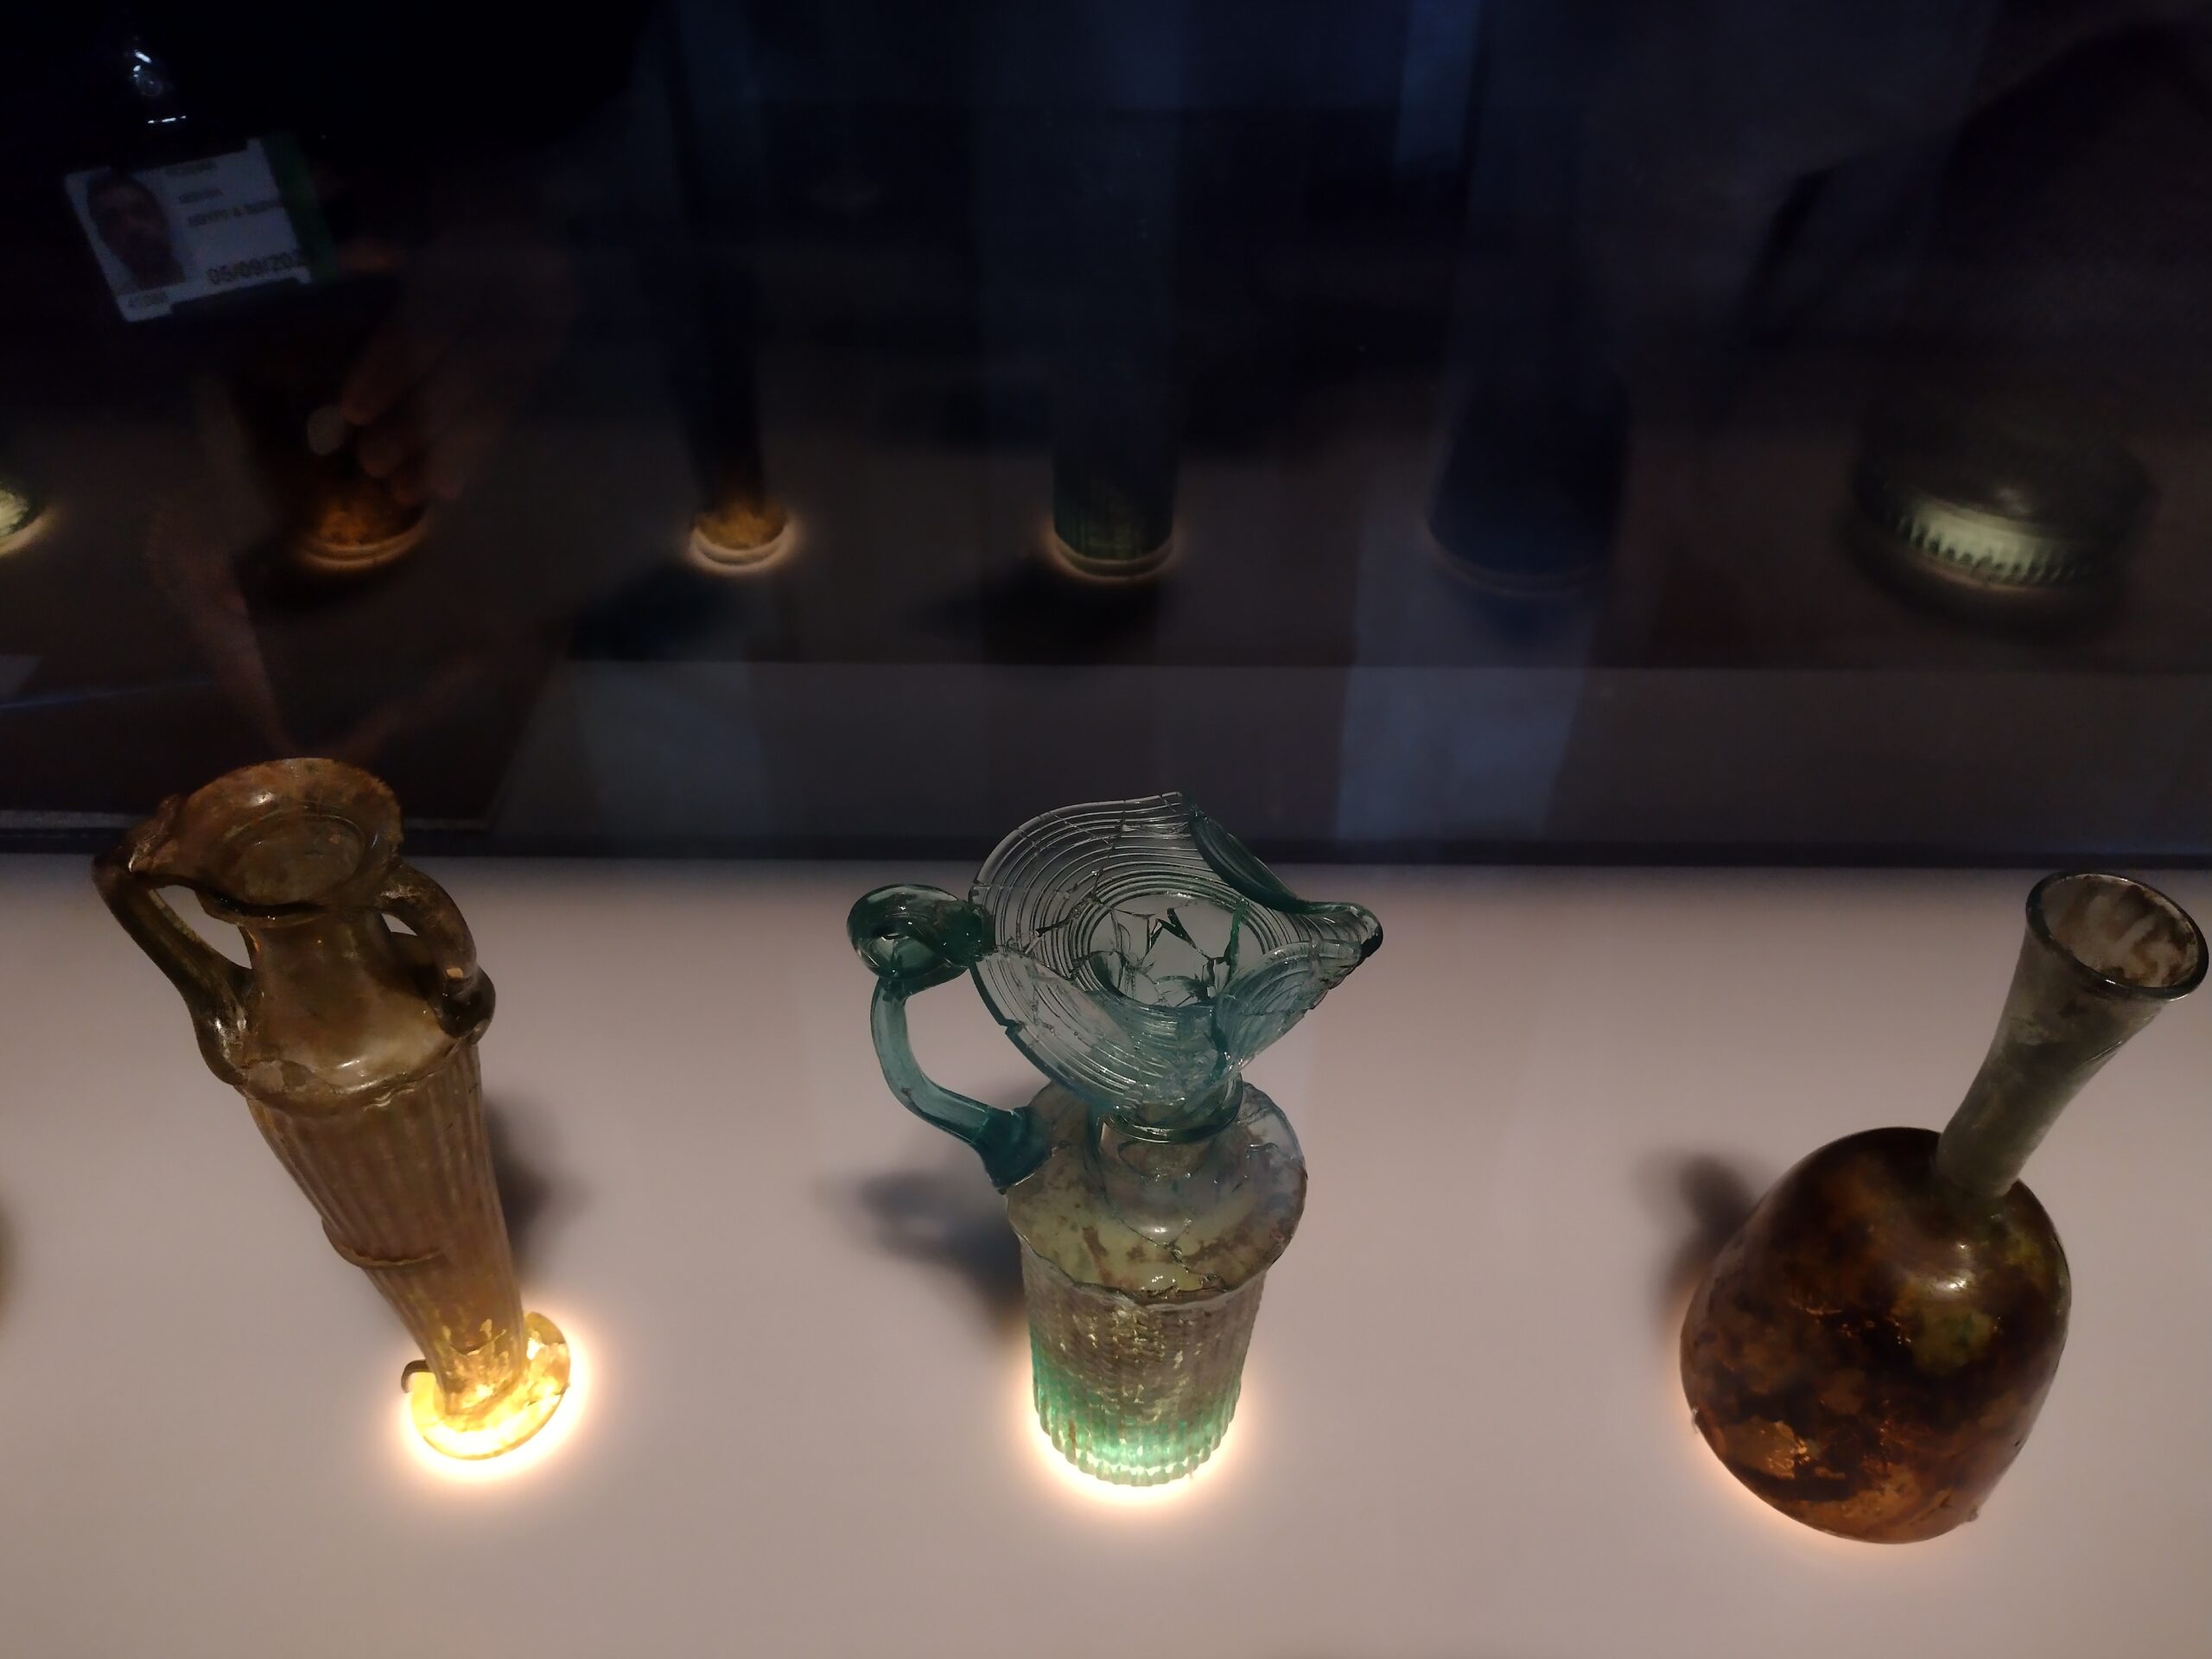 3 restored glass vessels on display in the Shattered Glass of Beirut exhibition at the British Museum